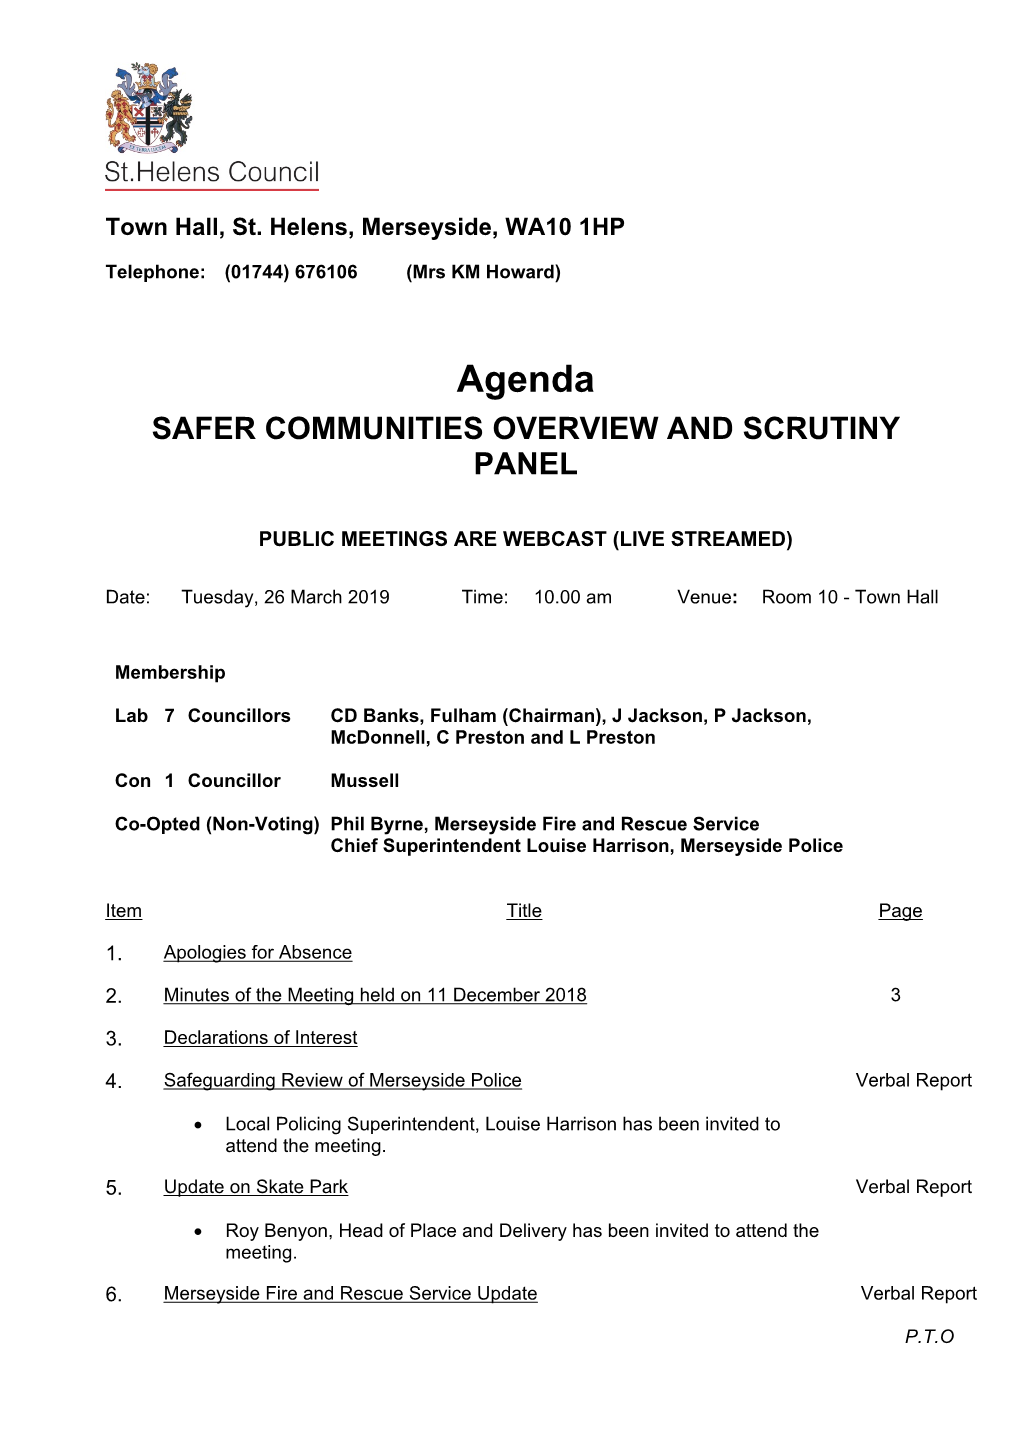 (Public Pack)Agenda Document for Safer Communities Overview and Scrutiny Panel, 26/03/2019 10:00